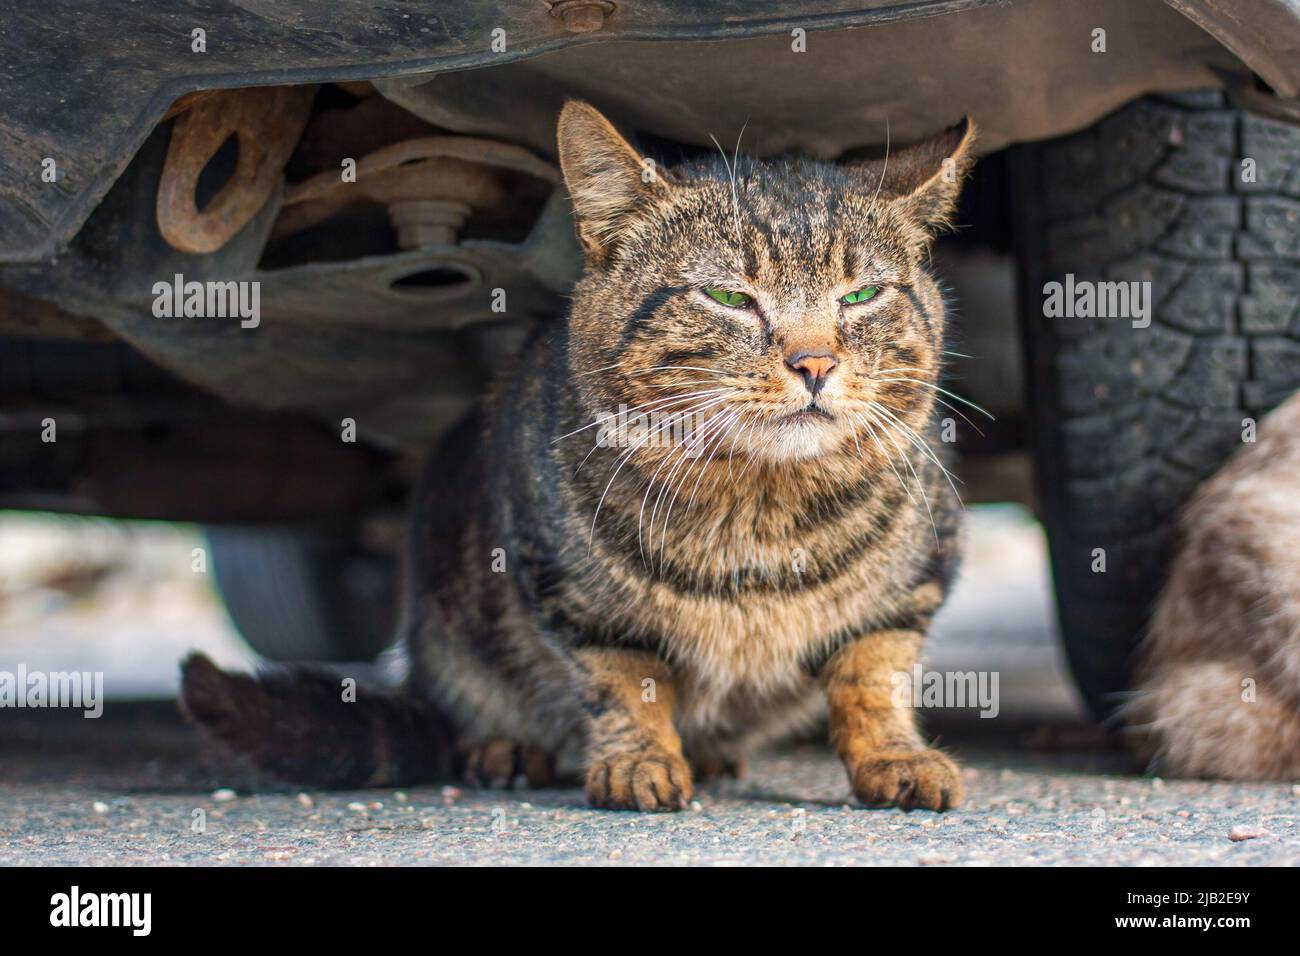 Beautiful striped cat with bright green eyes hid under car Stock Photo